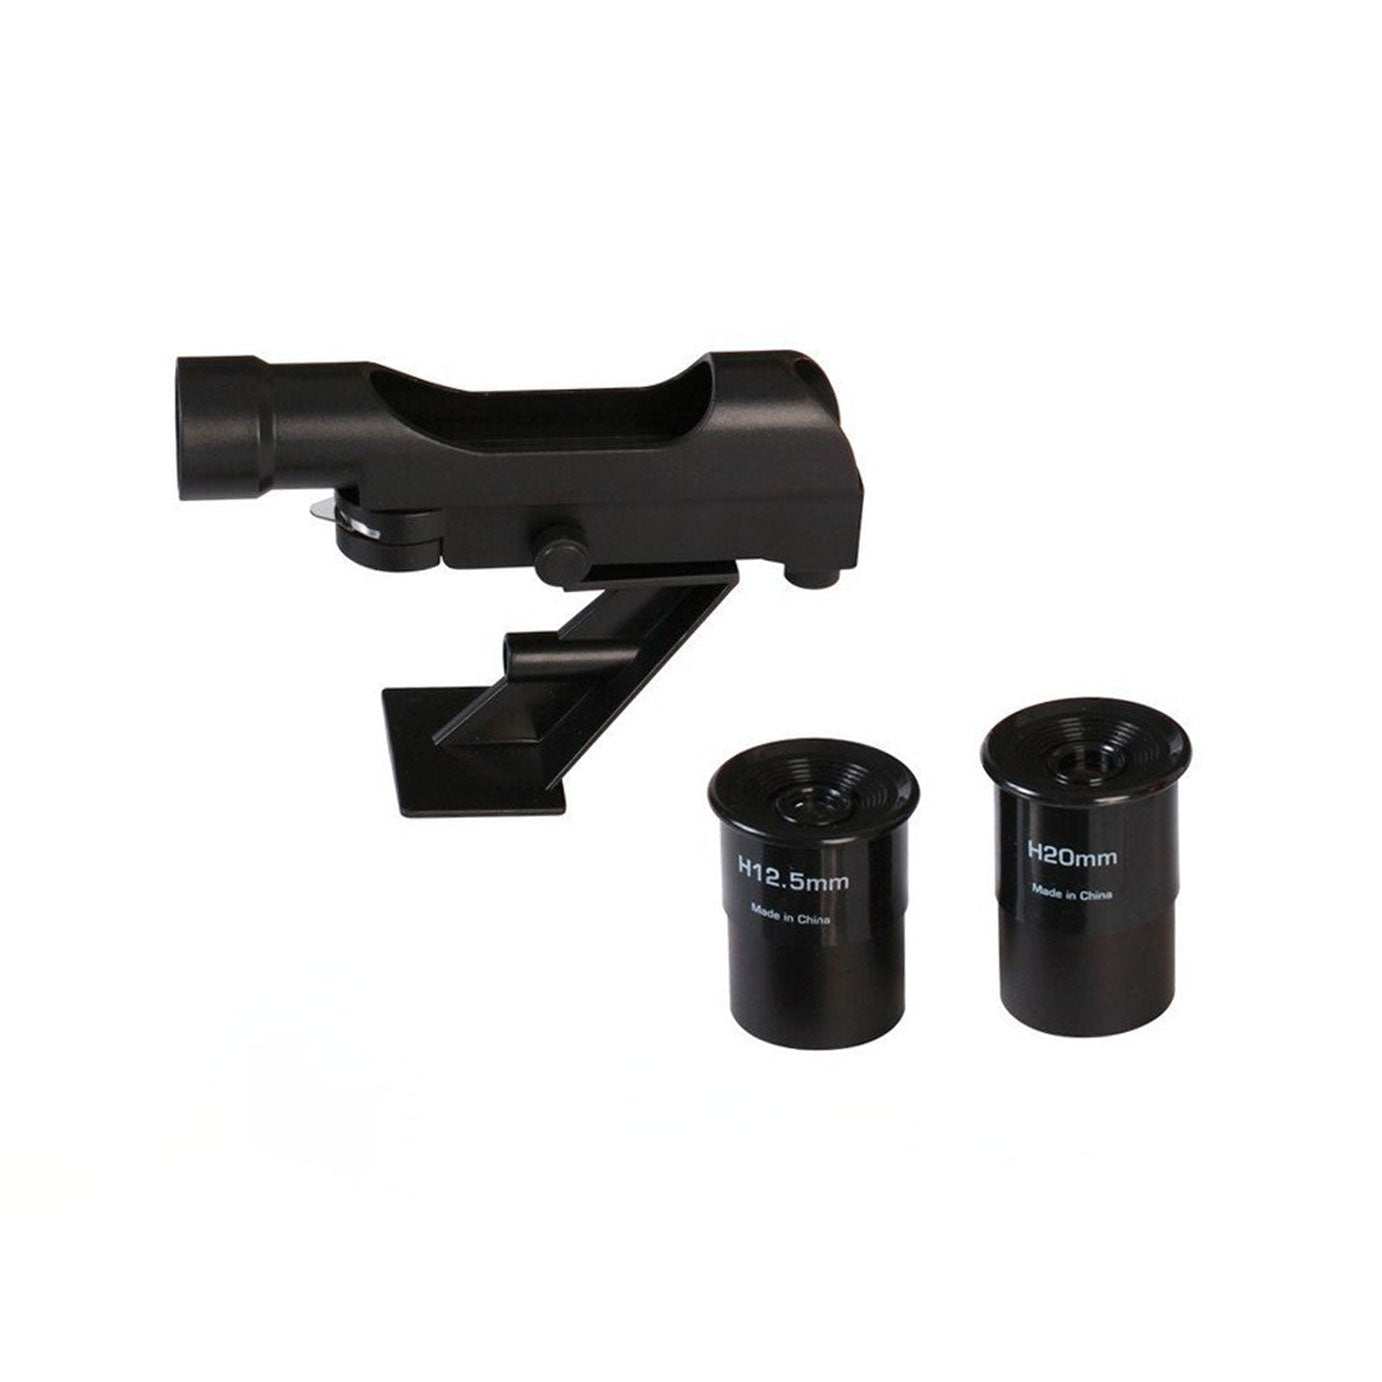 Easy and quick assembly. Two 1.25-inch diameter interchangeable eyepieces give you magnifications of 23x and 62x. Panhandle mount control allows you to smoothly move the telescope up, down and side to side.